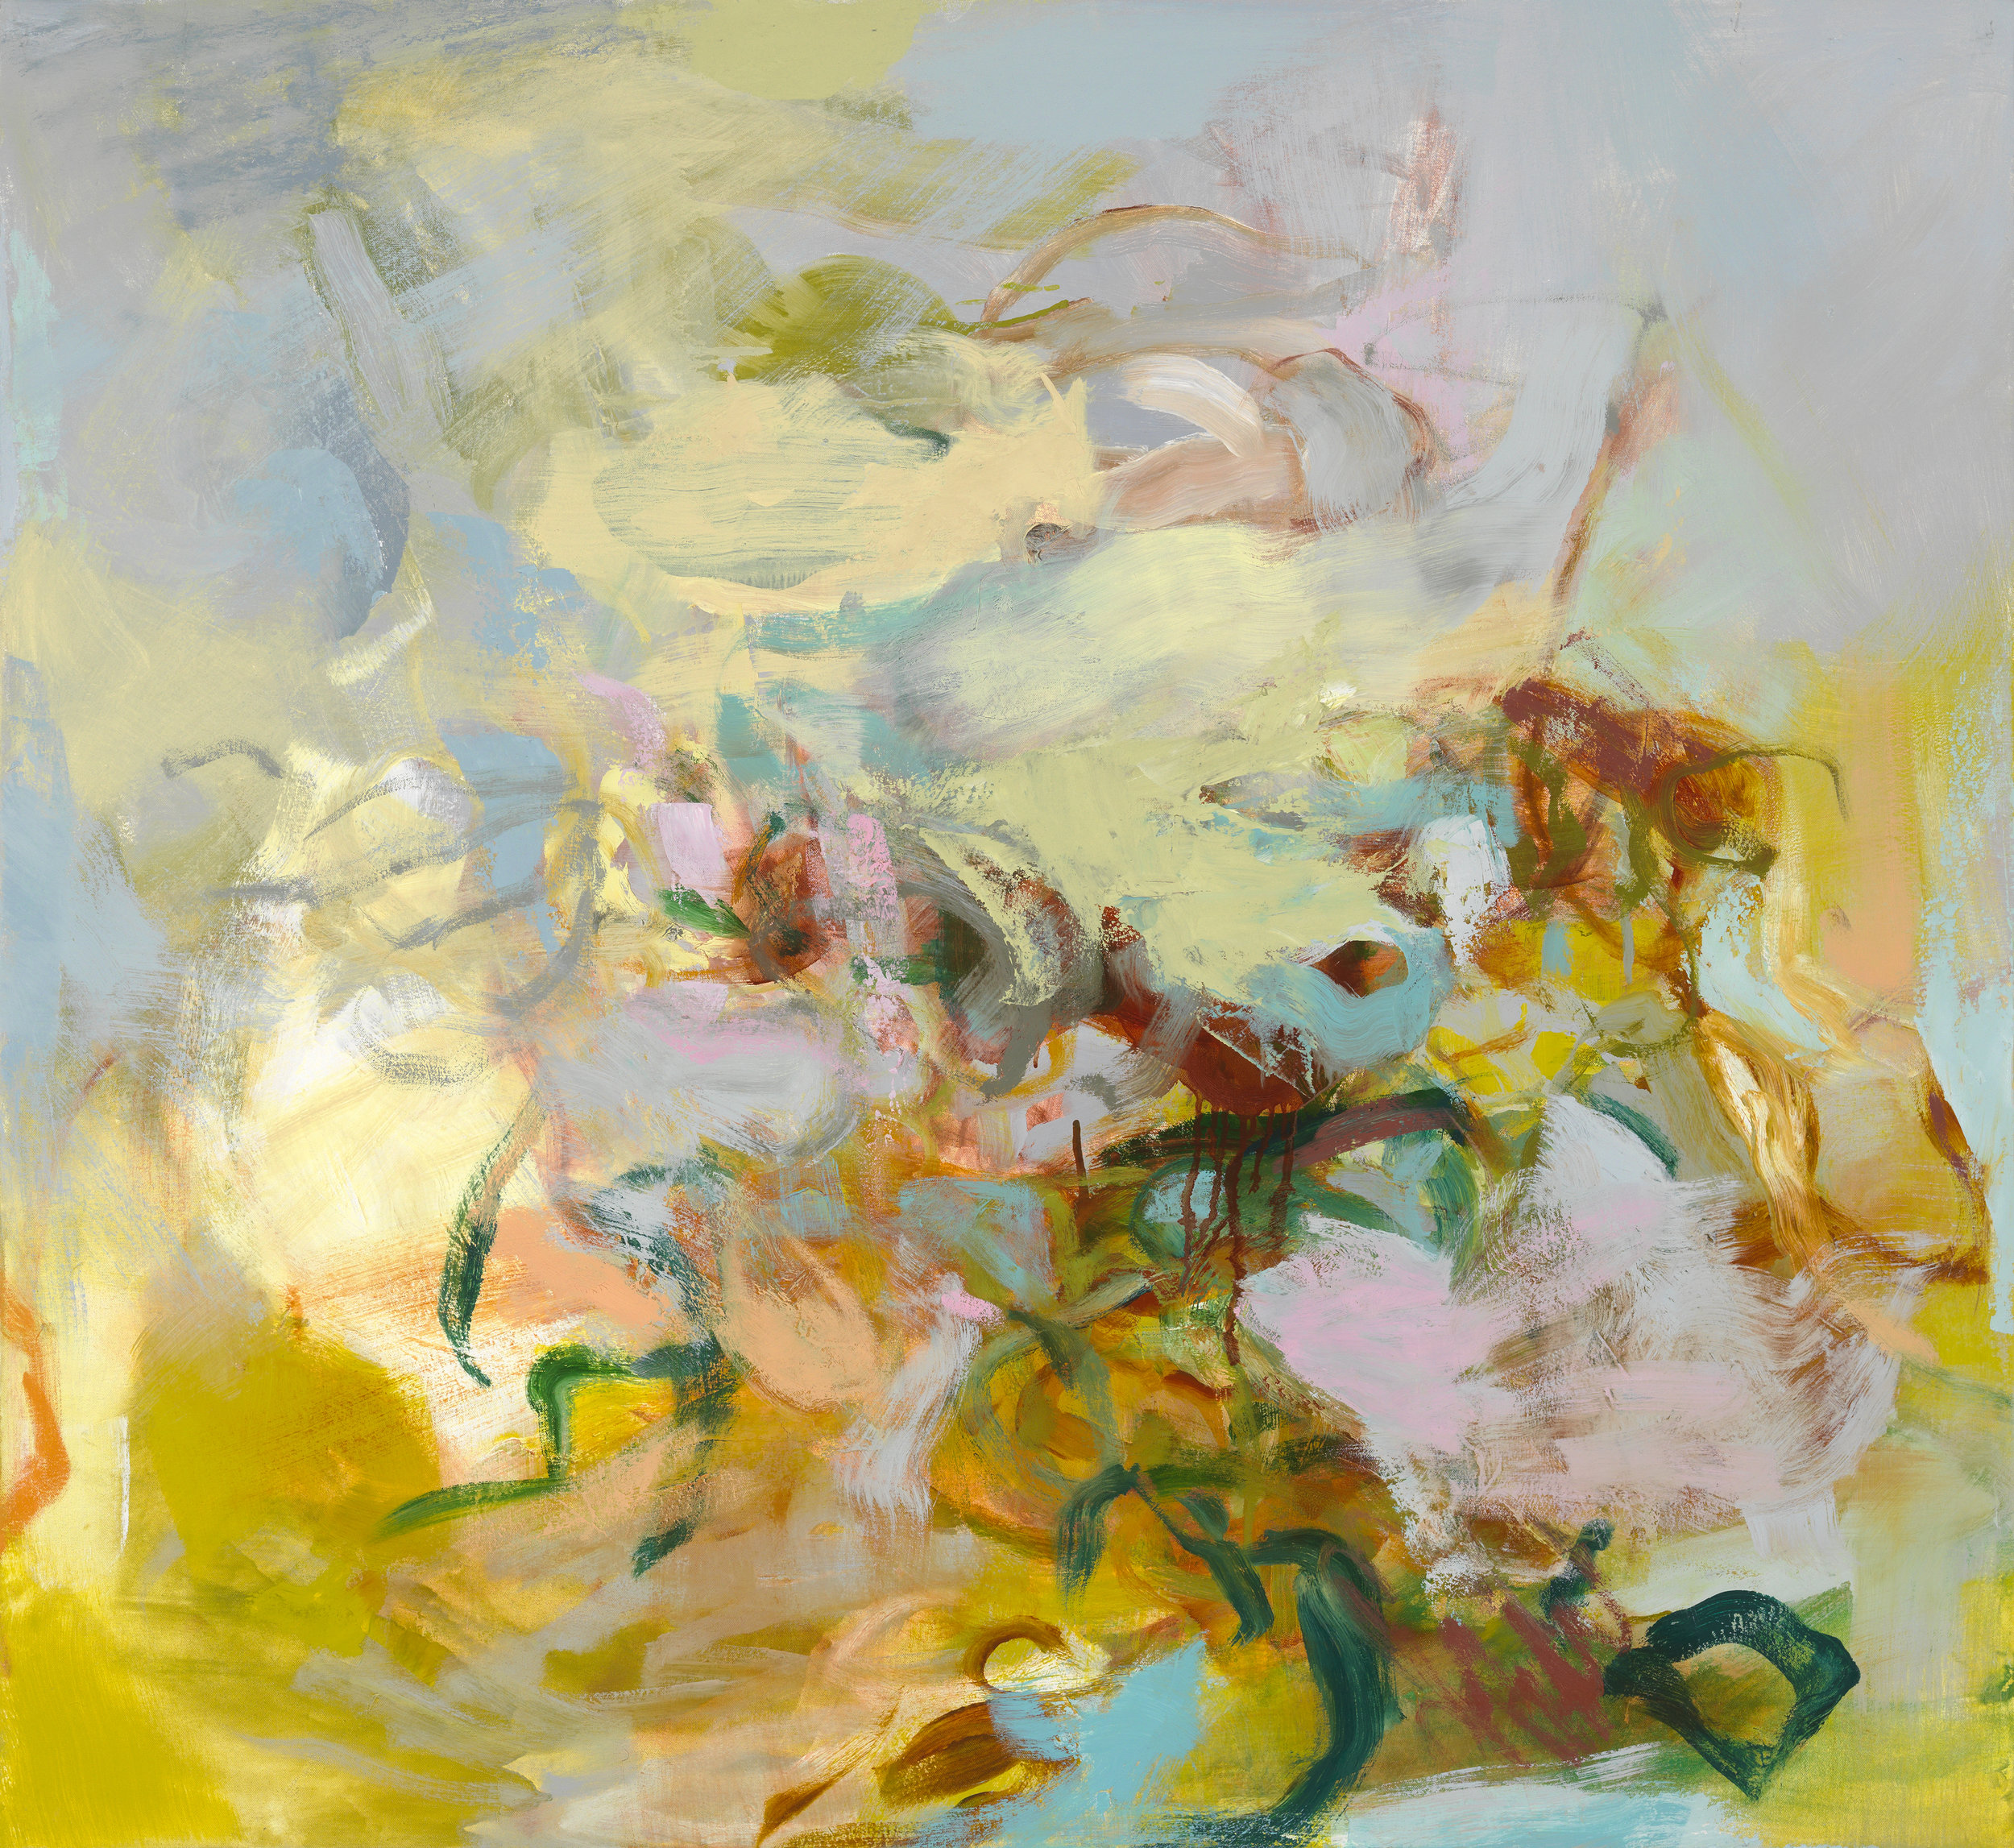  Kathy Soles,  Windswept , Oil on canvas, 44x48 